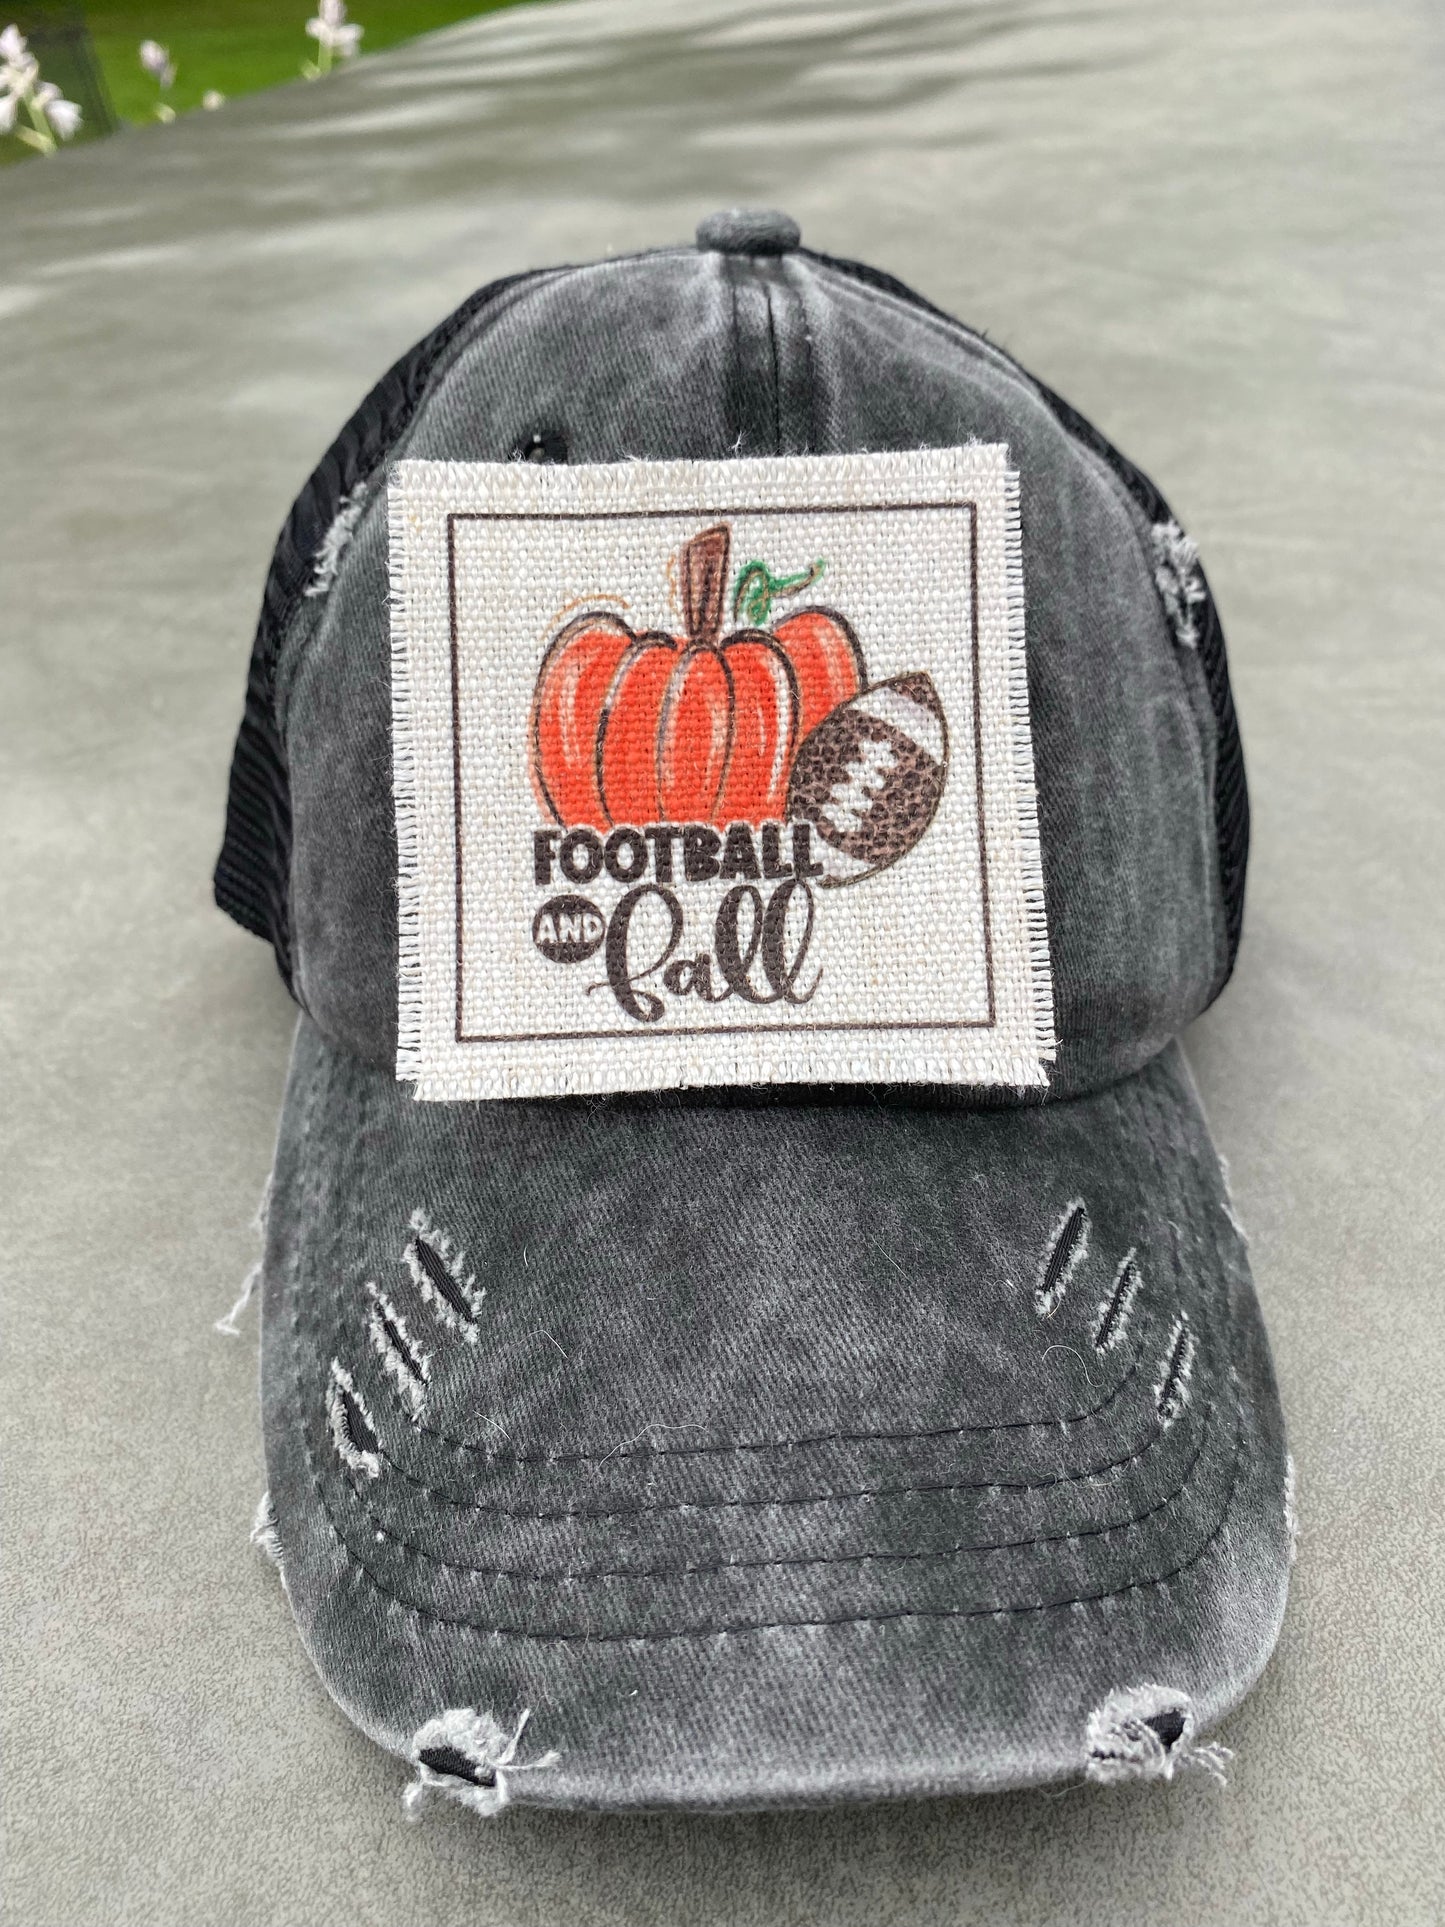 Football and Fall Hat Patch